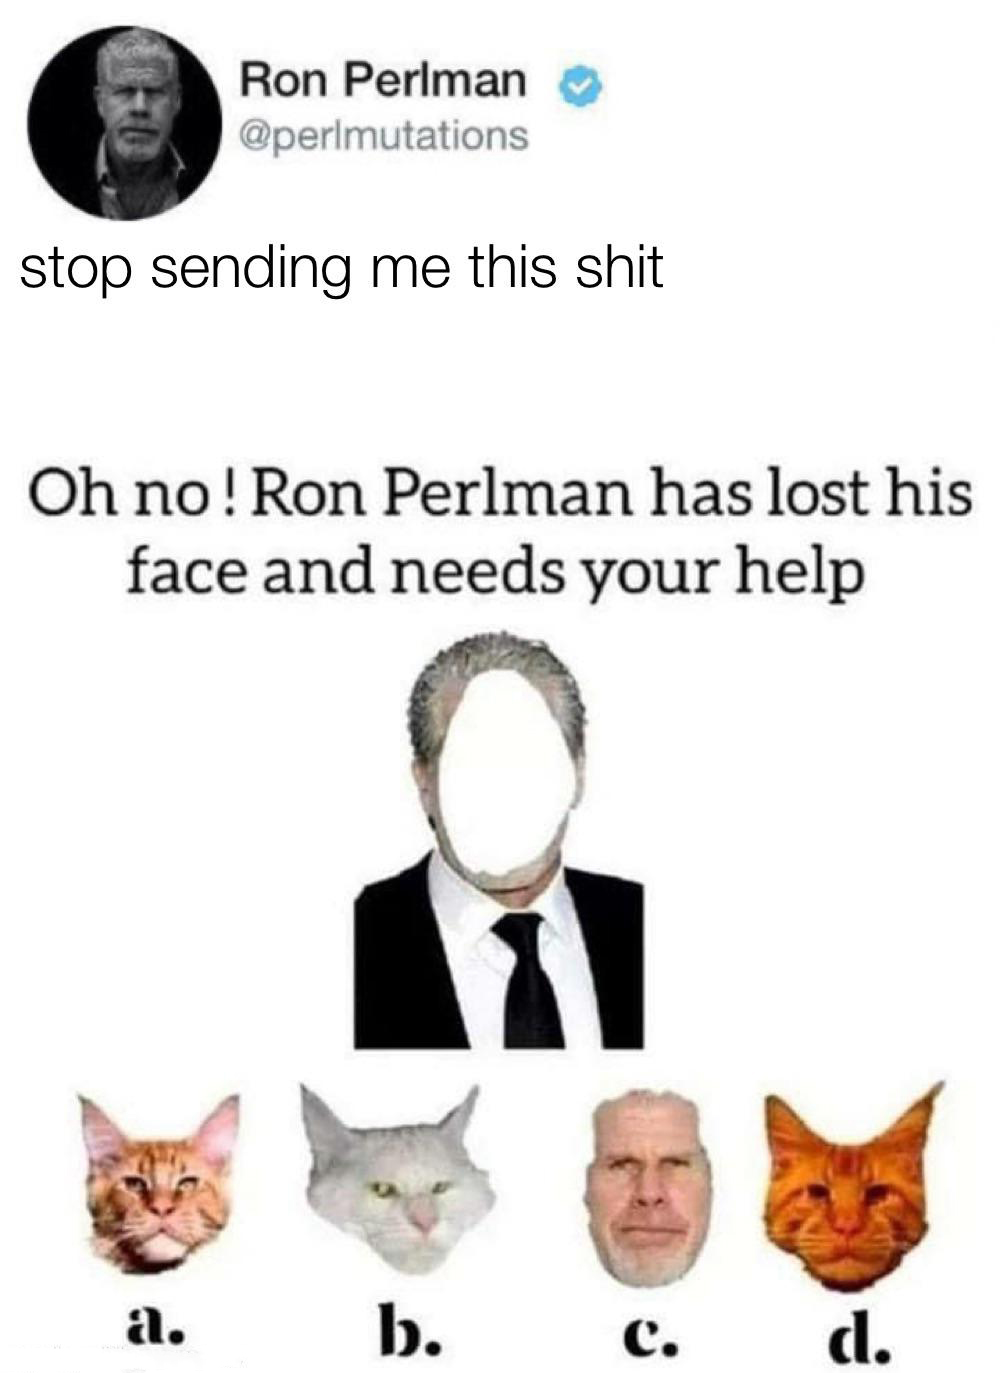 oh no ron perlman - Ron Perlman stop sending me this shit Oh no! Ron Perlman has lost his face and needs your help a. b. C. d.